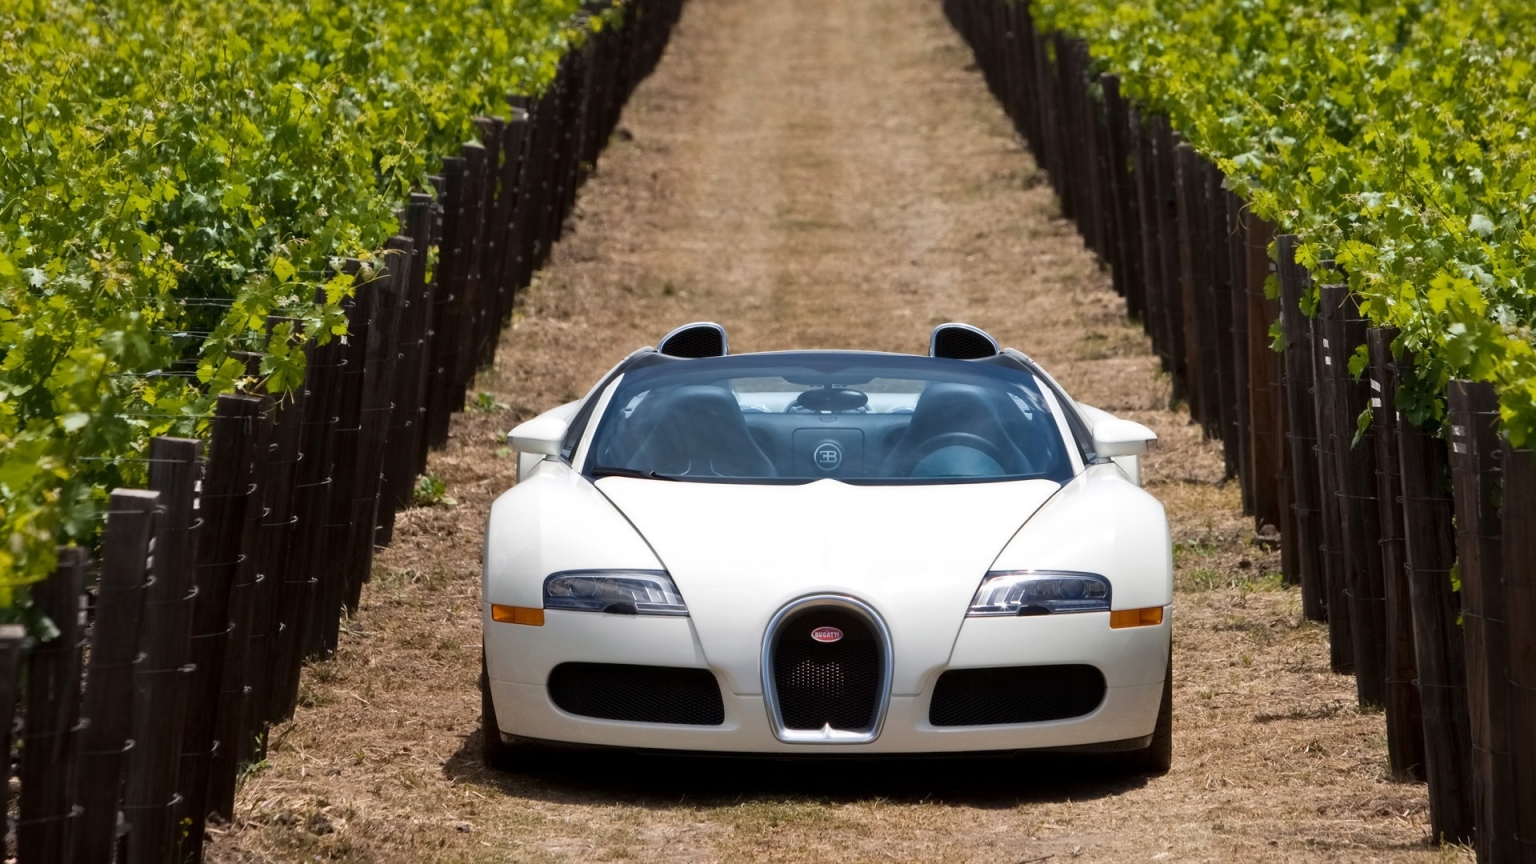 Bugatti Veyron 16.4 Grand Sport 2010 in Napa Valley - Front 3 for 1536 x 864 HDTV resolution